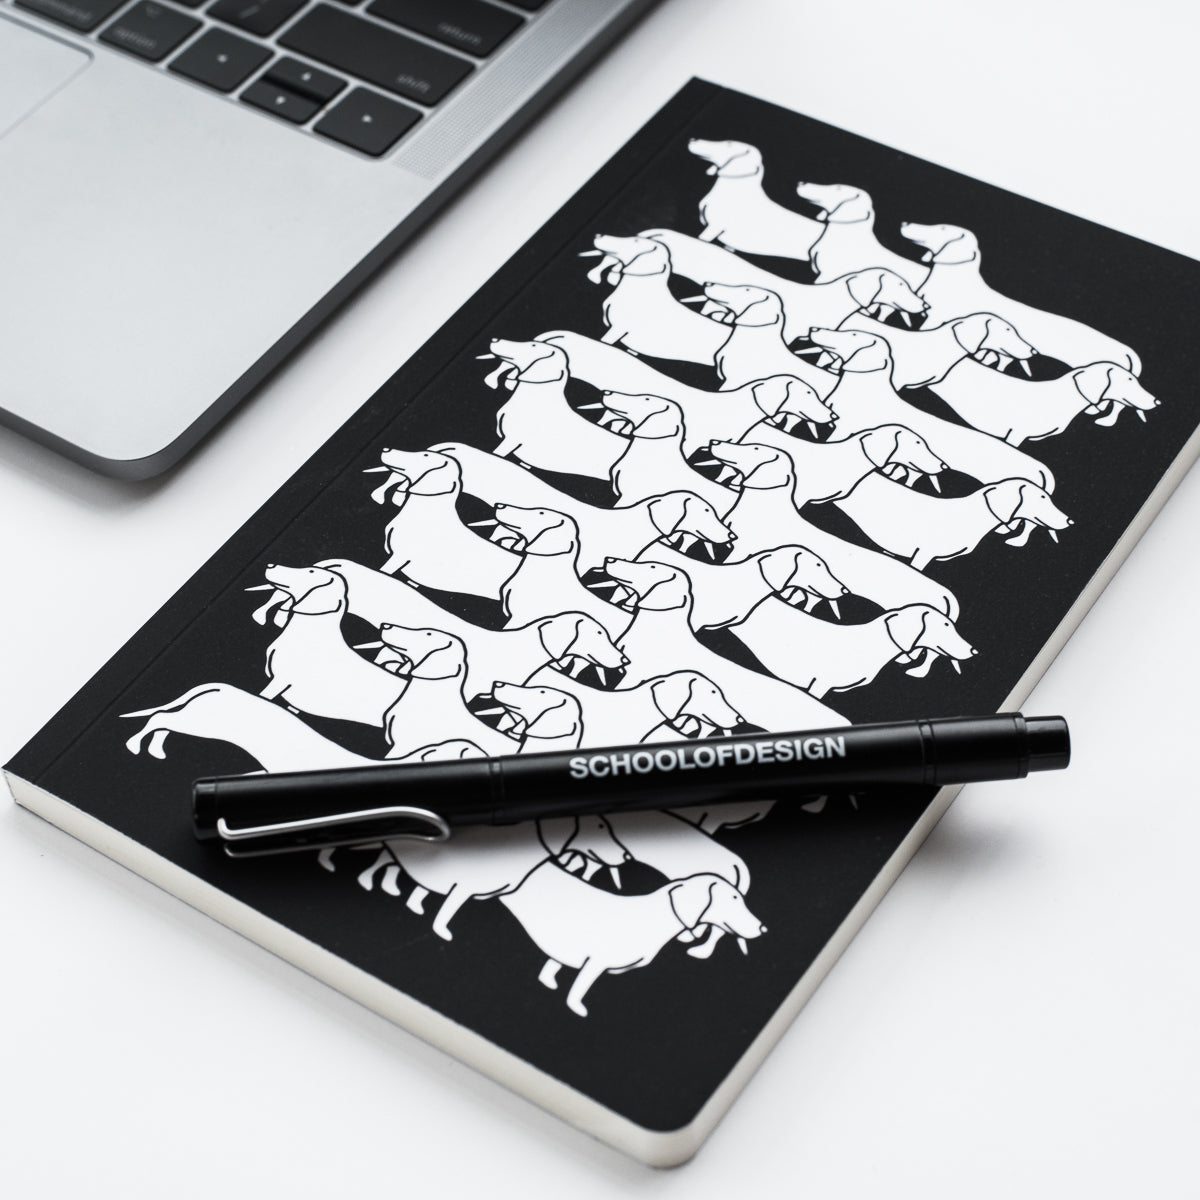 close up of black notebook with horizontal dog illustration pattern in white and school of design black pen